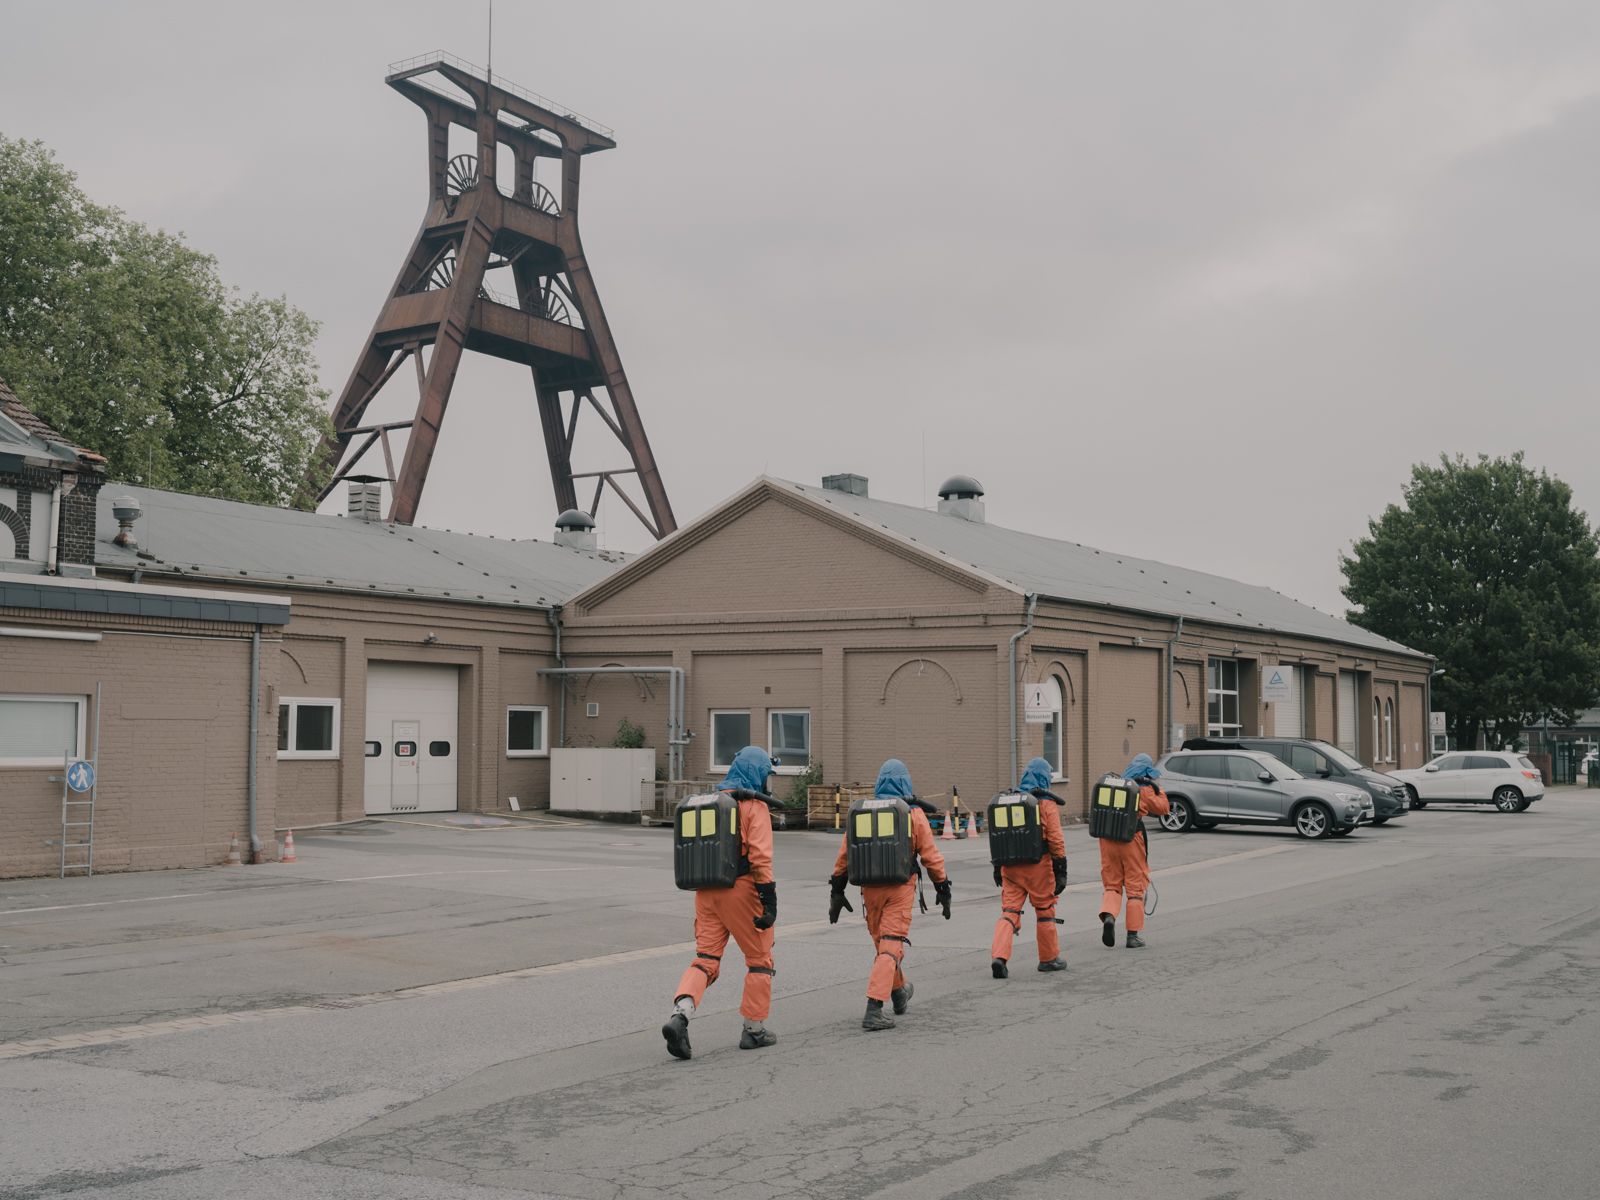 © Arne Piepke - Four mine rescue members after their training at the old Pluto colliery site in Wanne-Eickel.